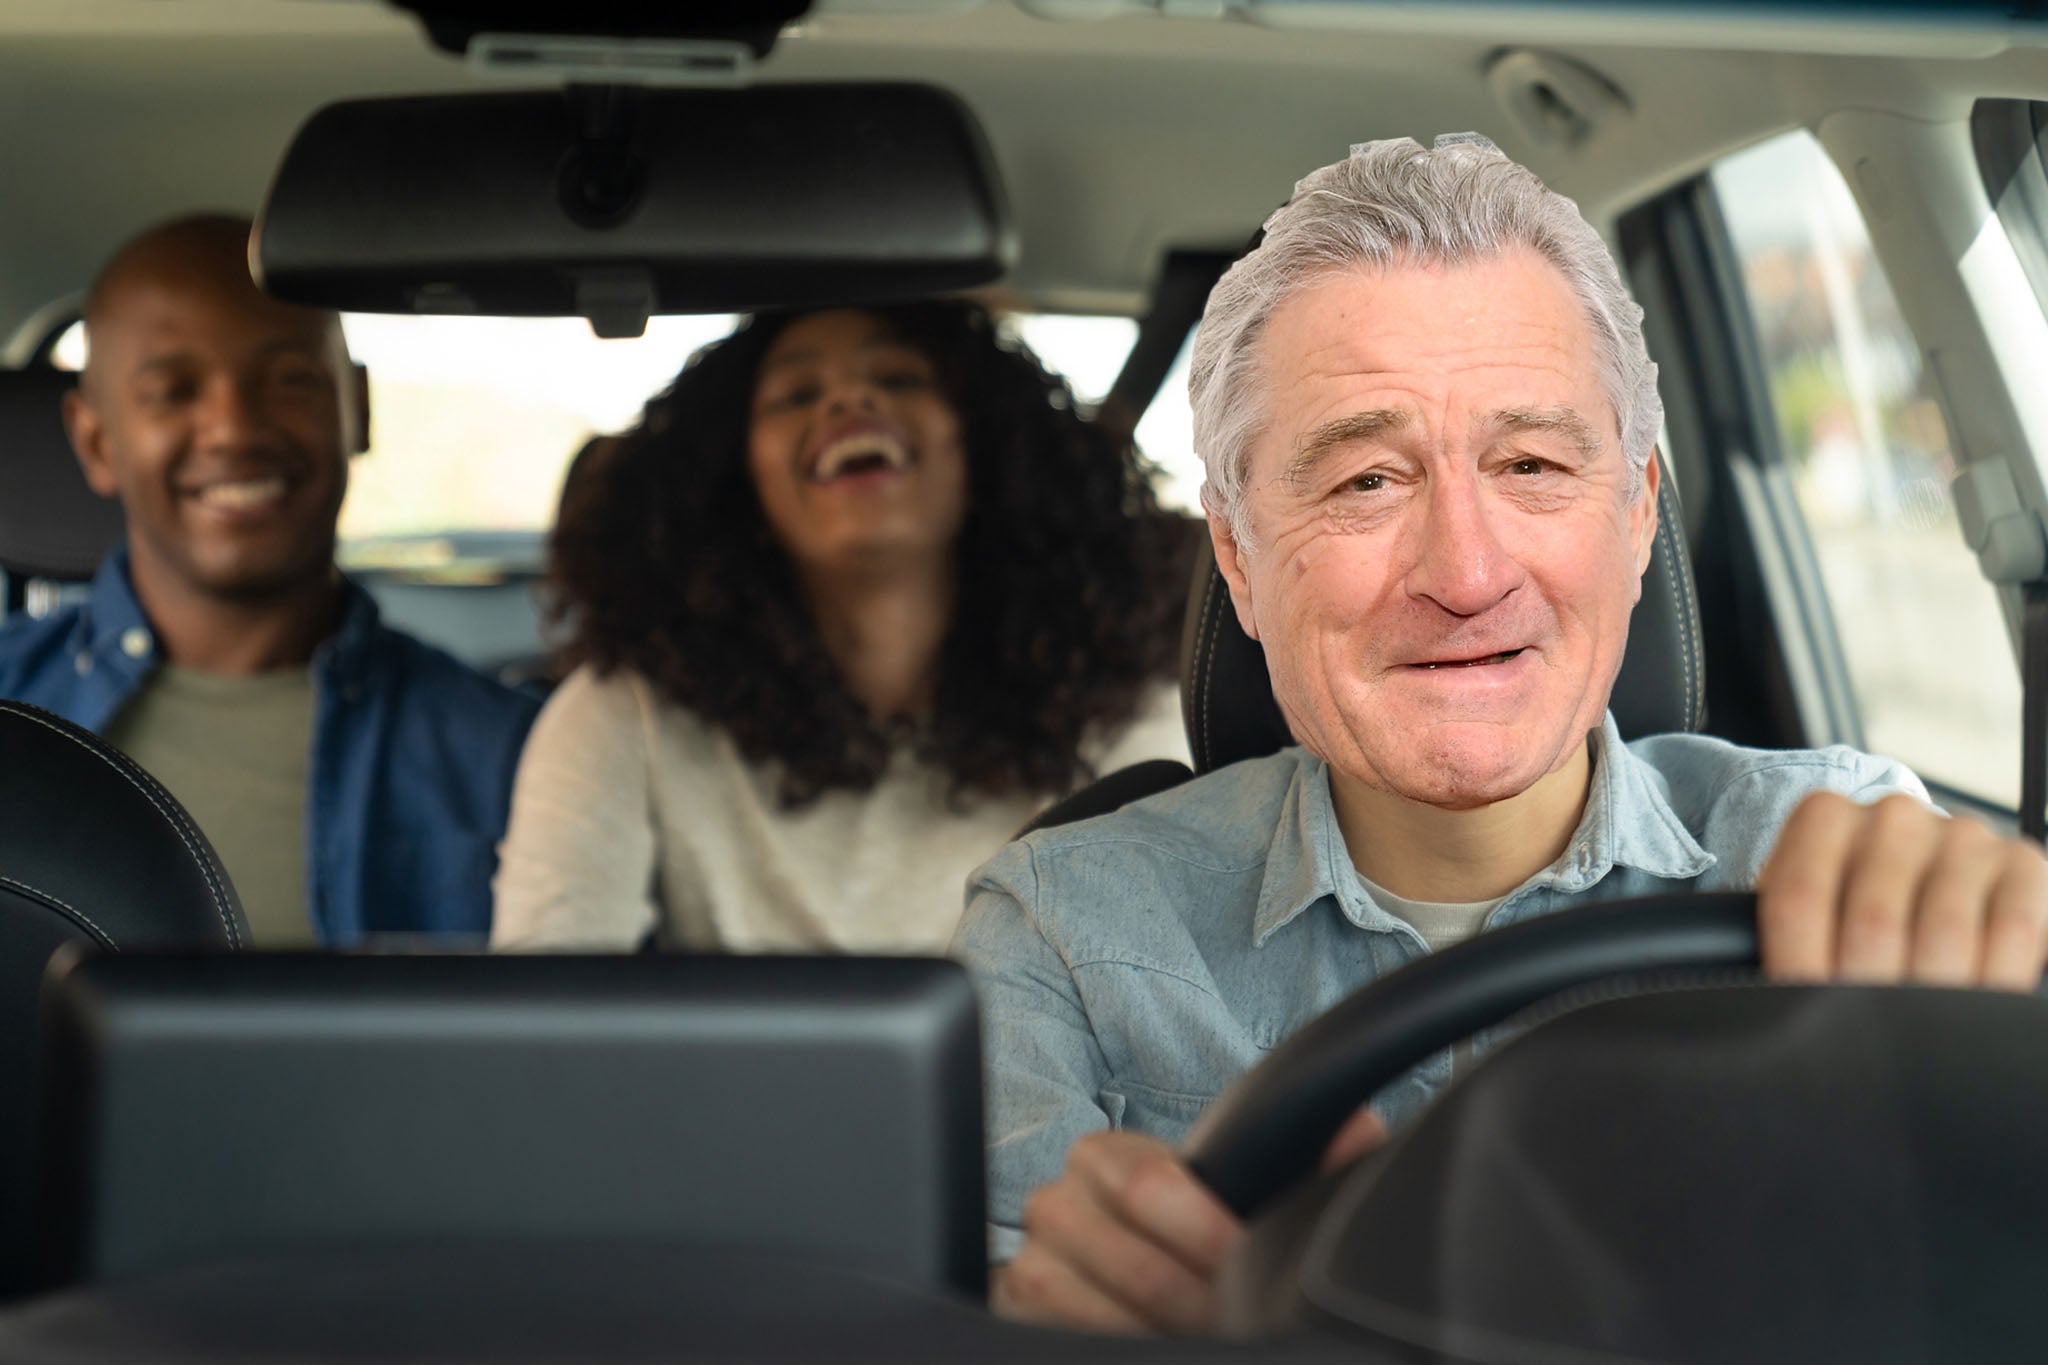 You ridin’ with me?: How Robert De Niro might look in his forthcoming advert for Uber